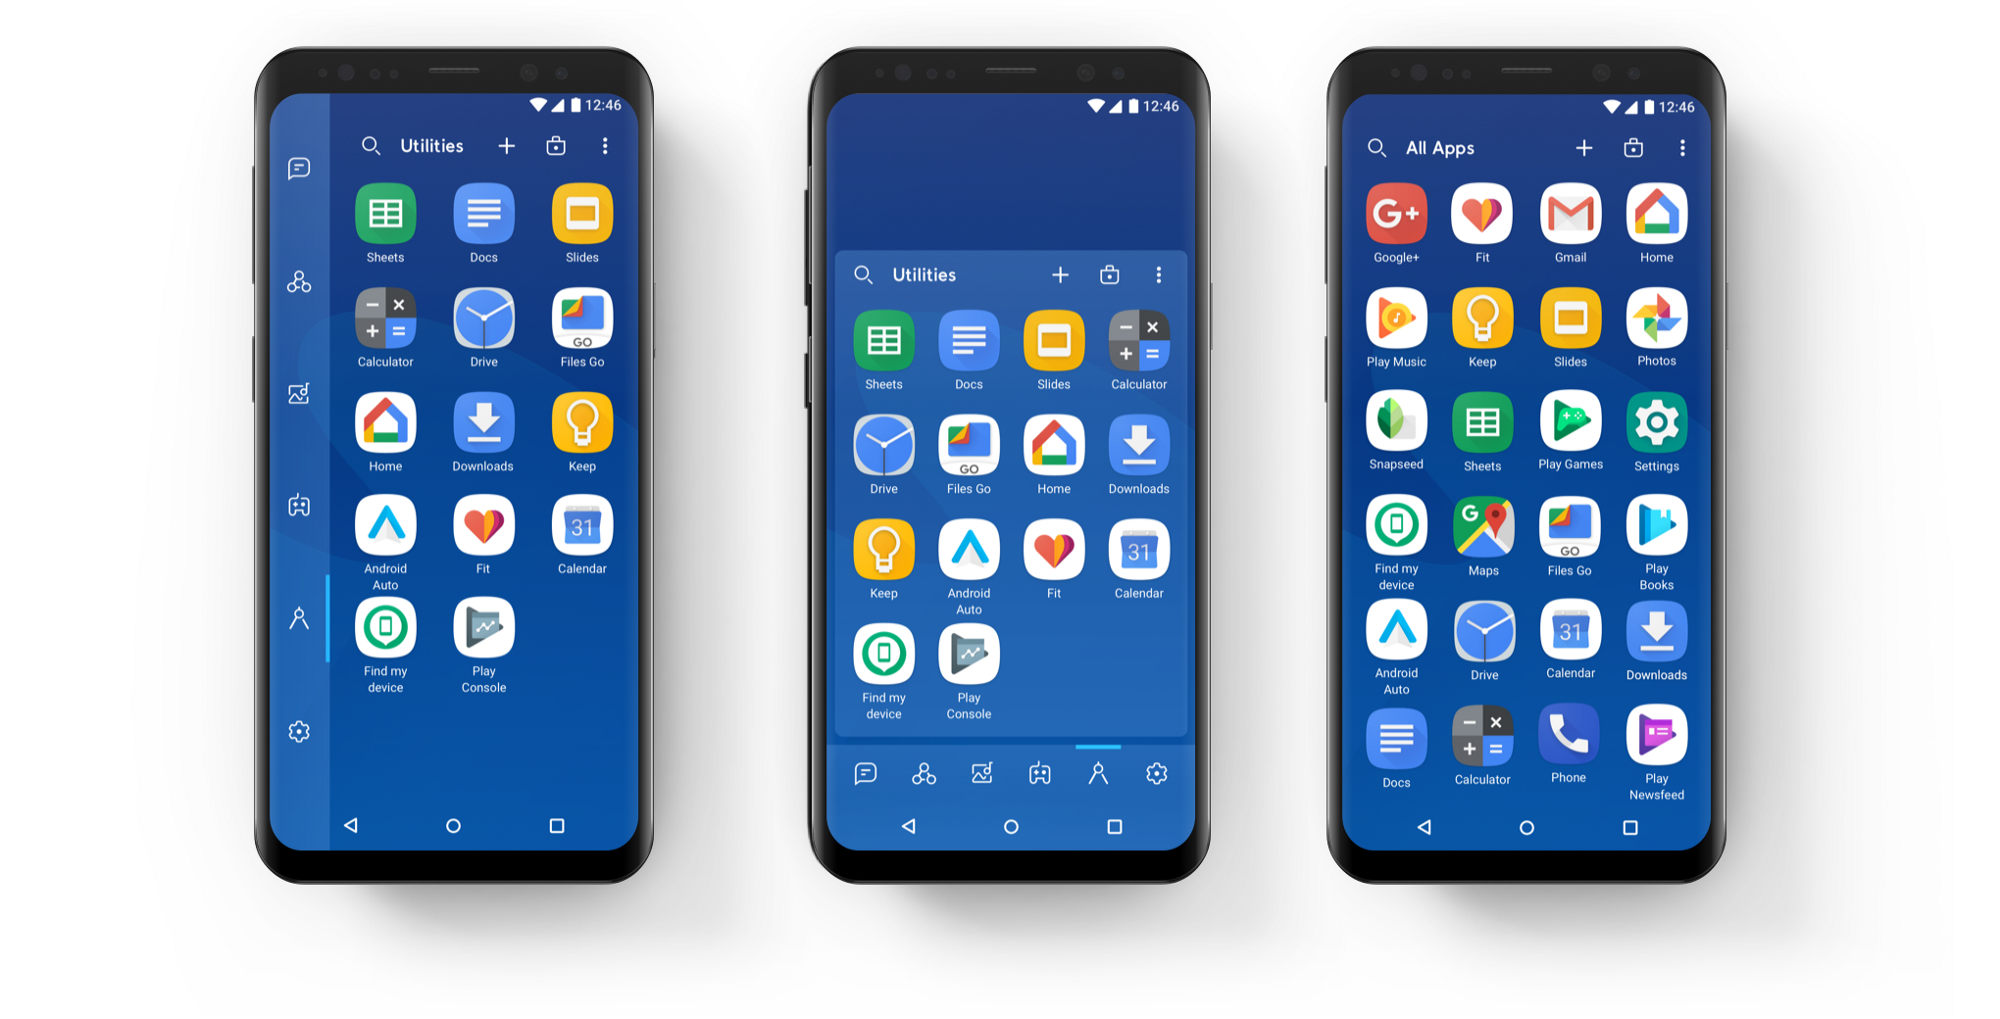 Smart Launcher 5.0's different app drawer layouts - Smart Launcher gets completely overhauled with loads of new features